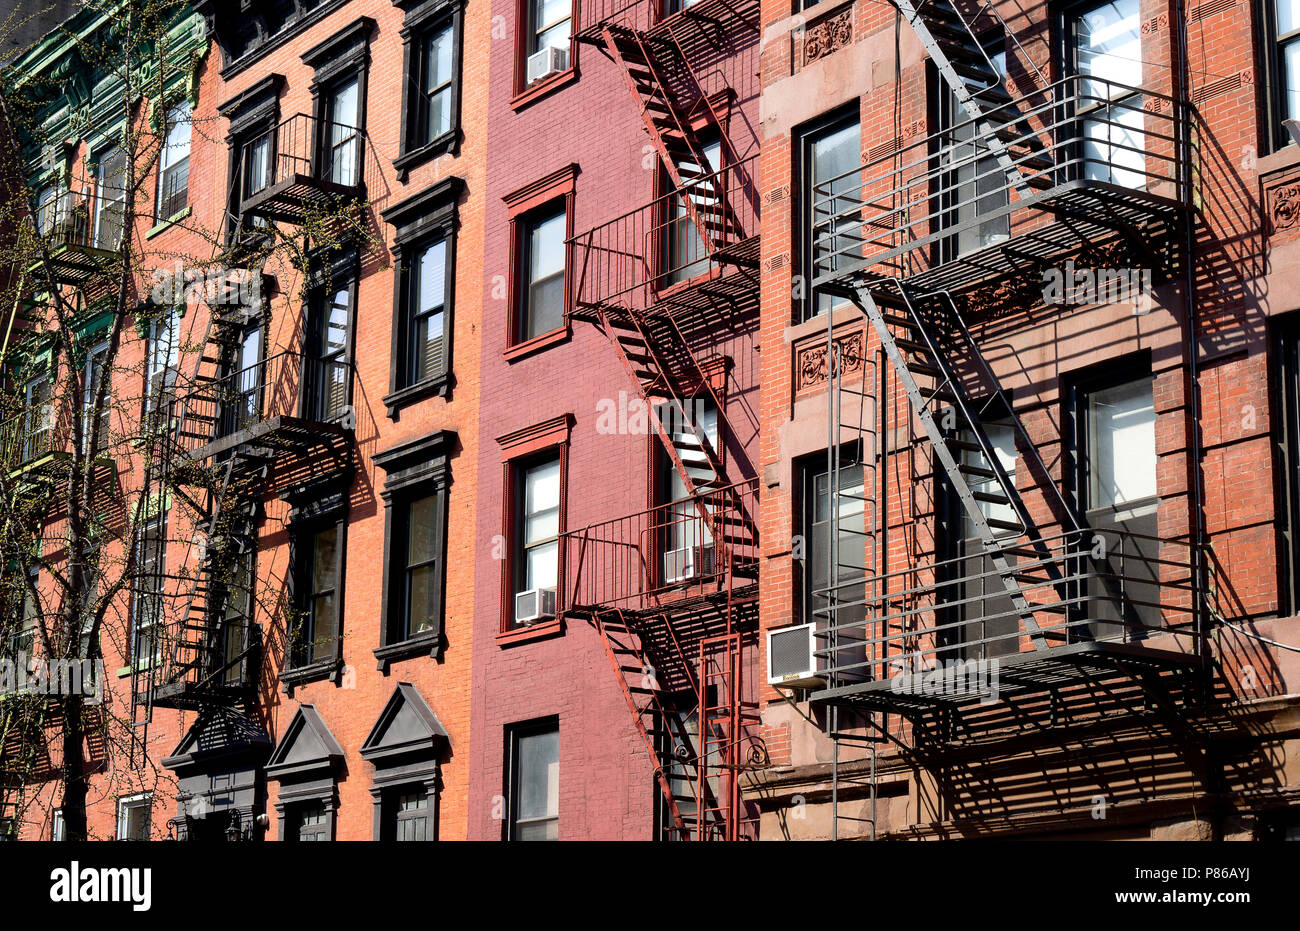 New York City East village building details with fire escapes Stock Photo